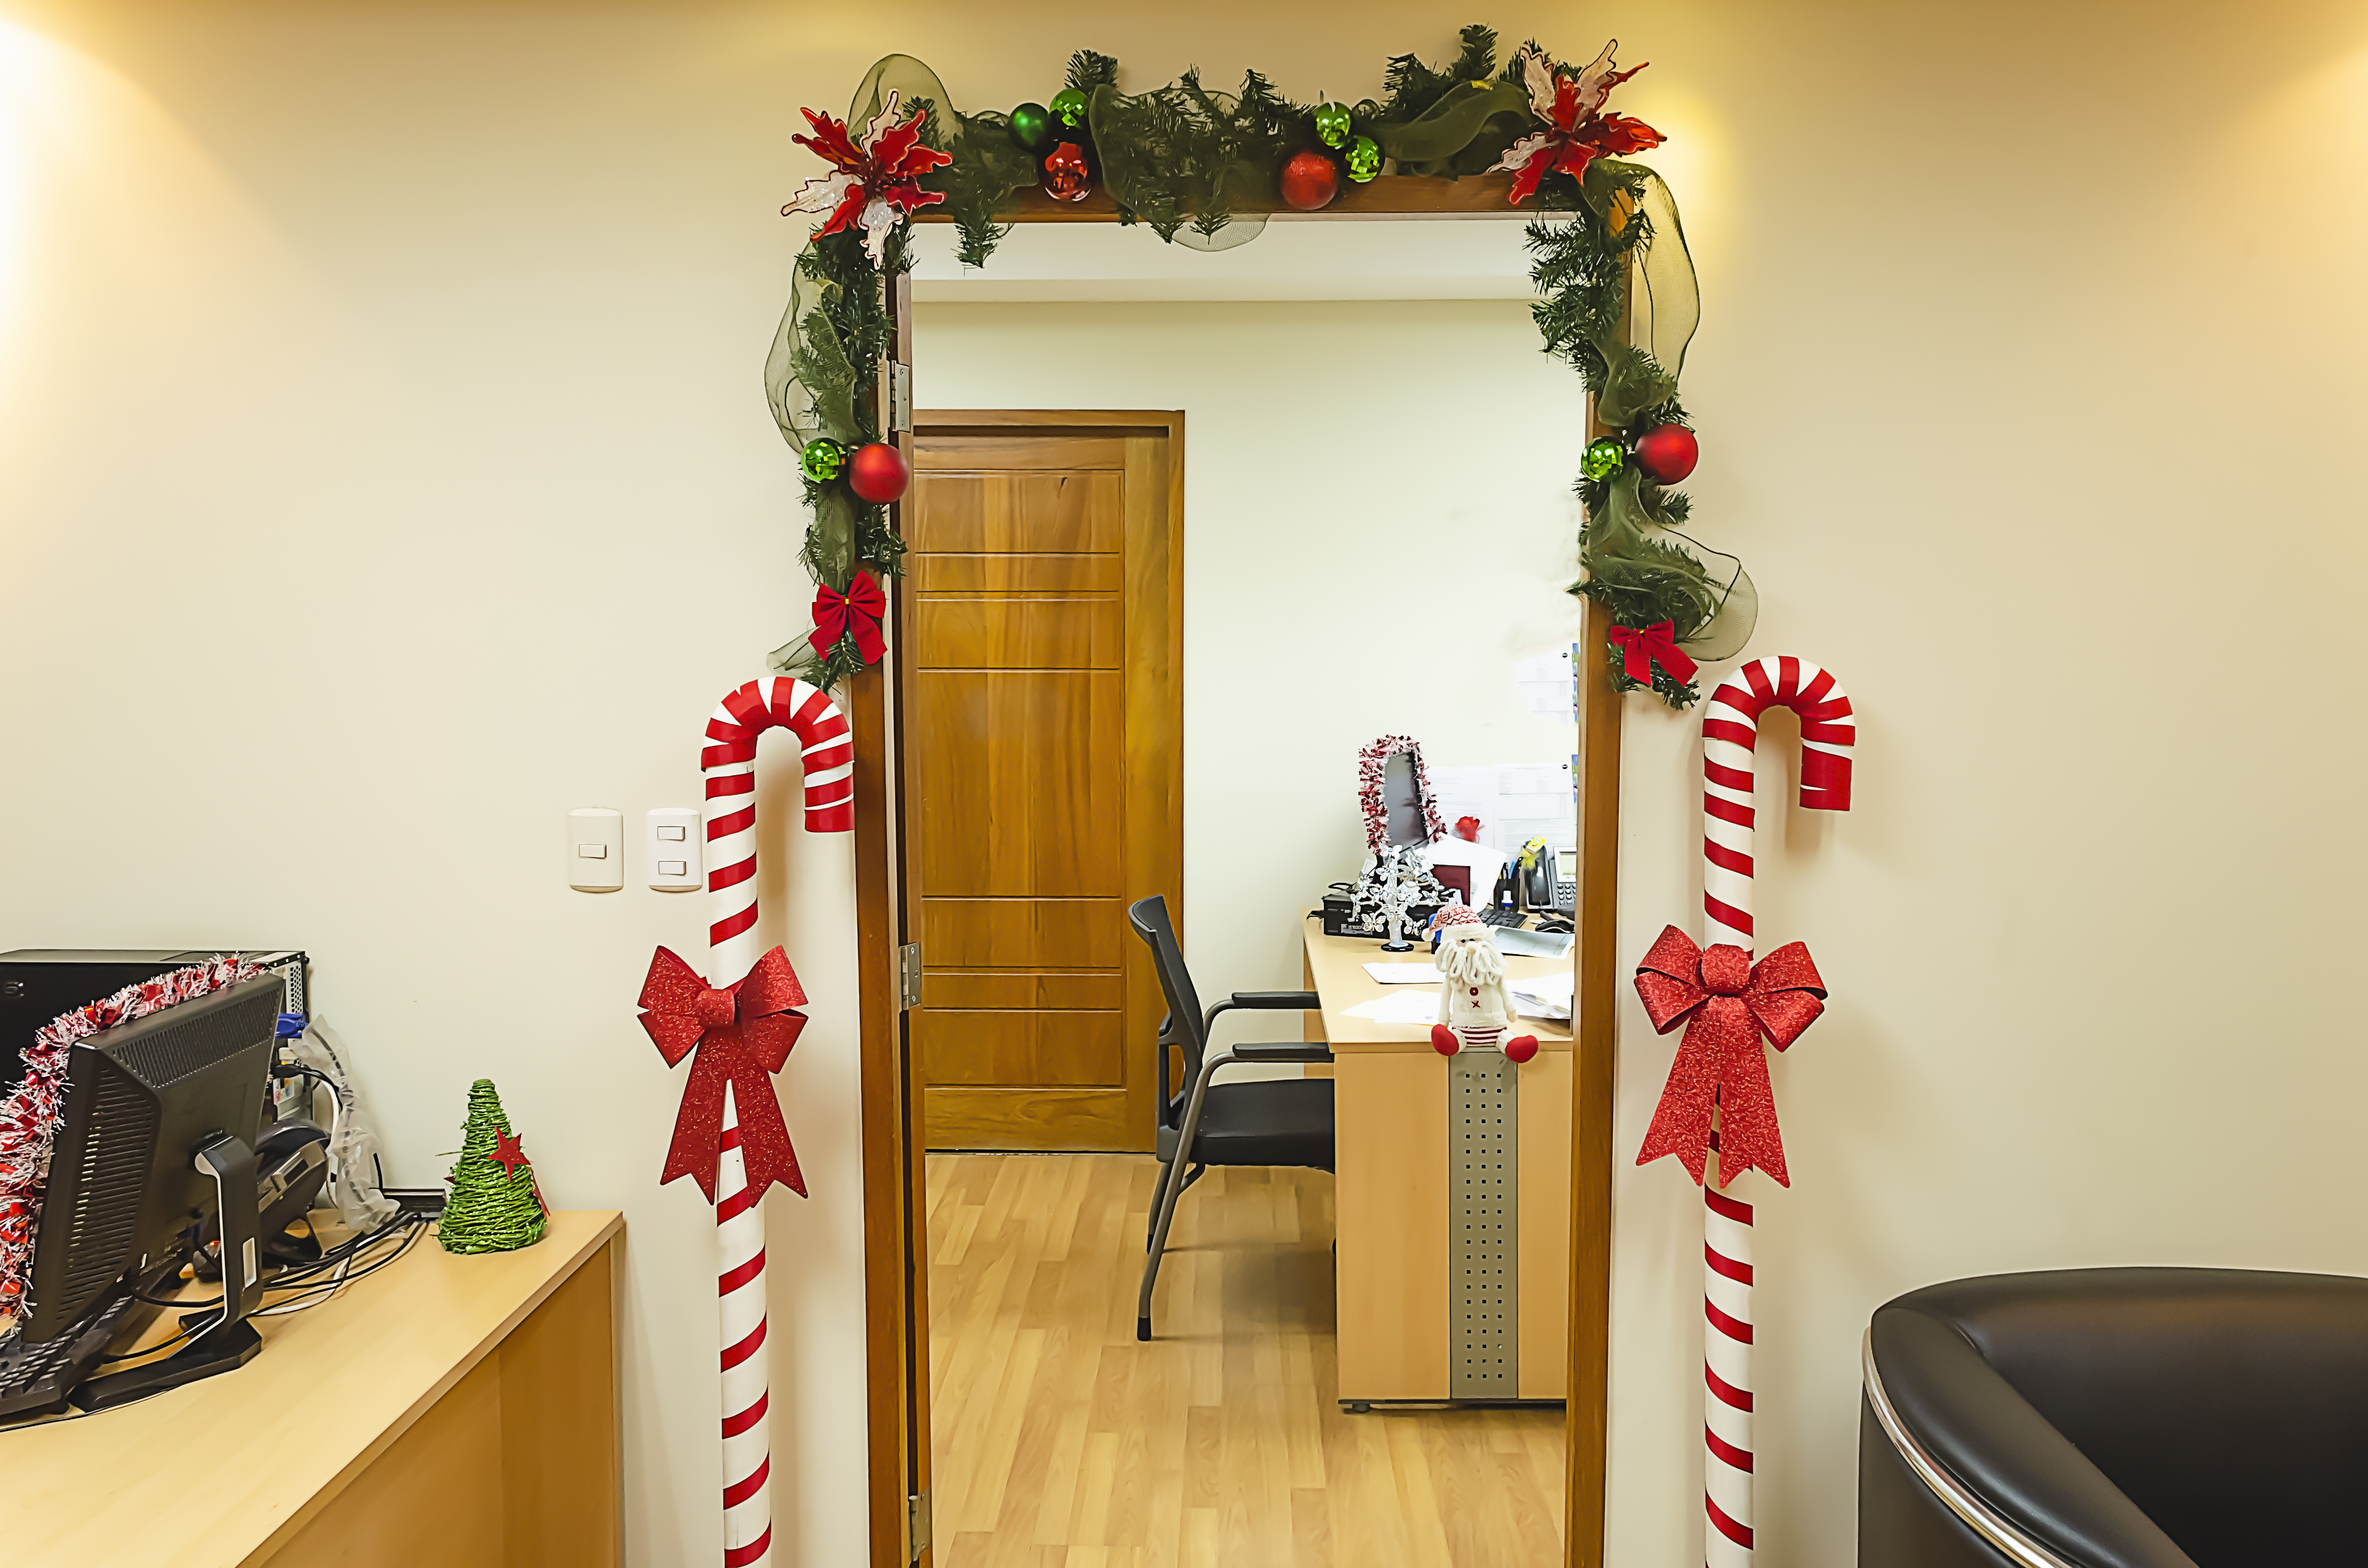 File:Office Christmas decorating contest (6522815561).jpg - Wikimedia  Commons